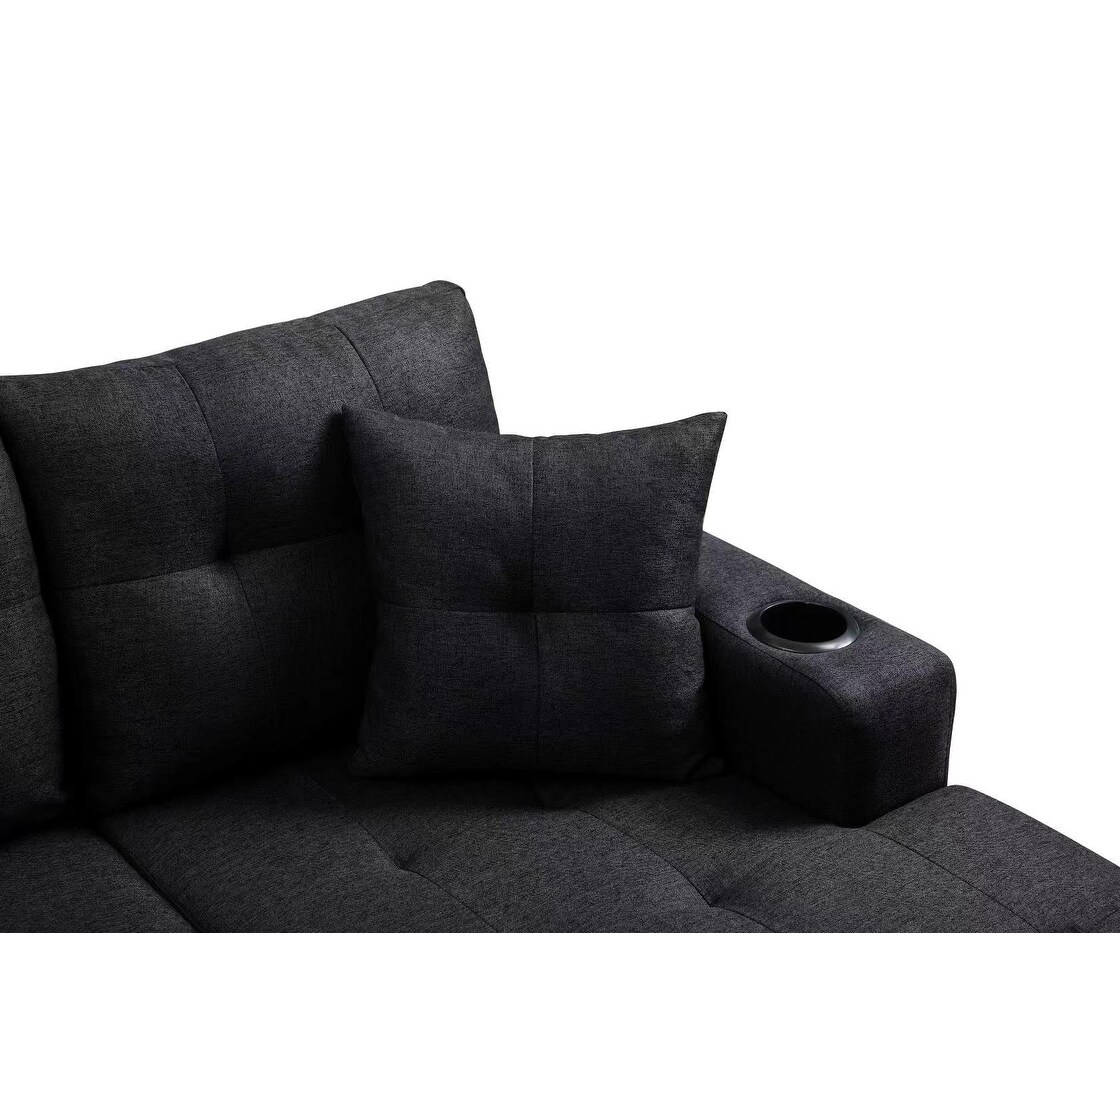 Modern Sofa, Right sectional sofa, convertible corner sofa with armrest storage, living room and apartment sectional sofa